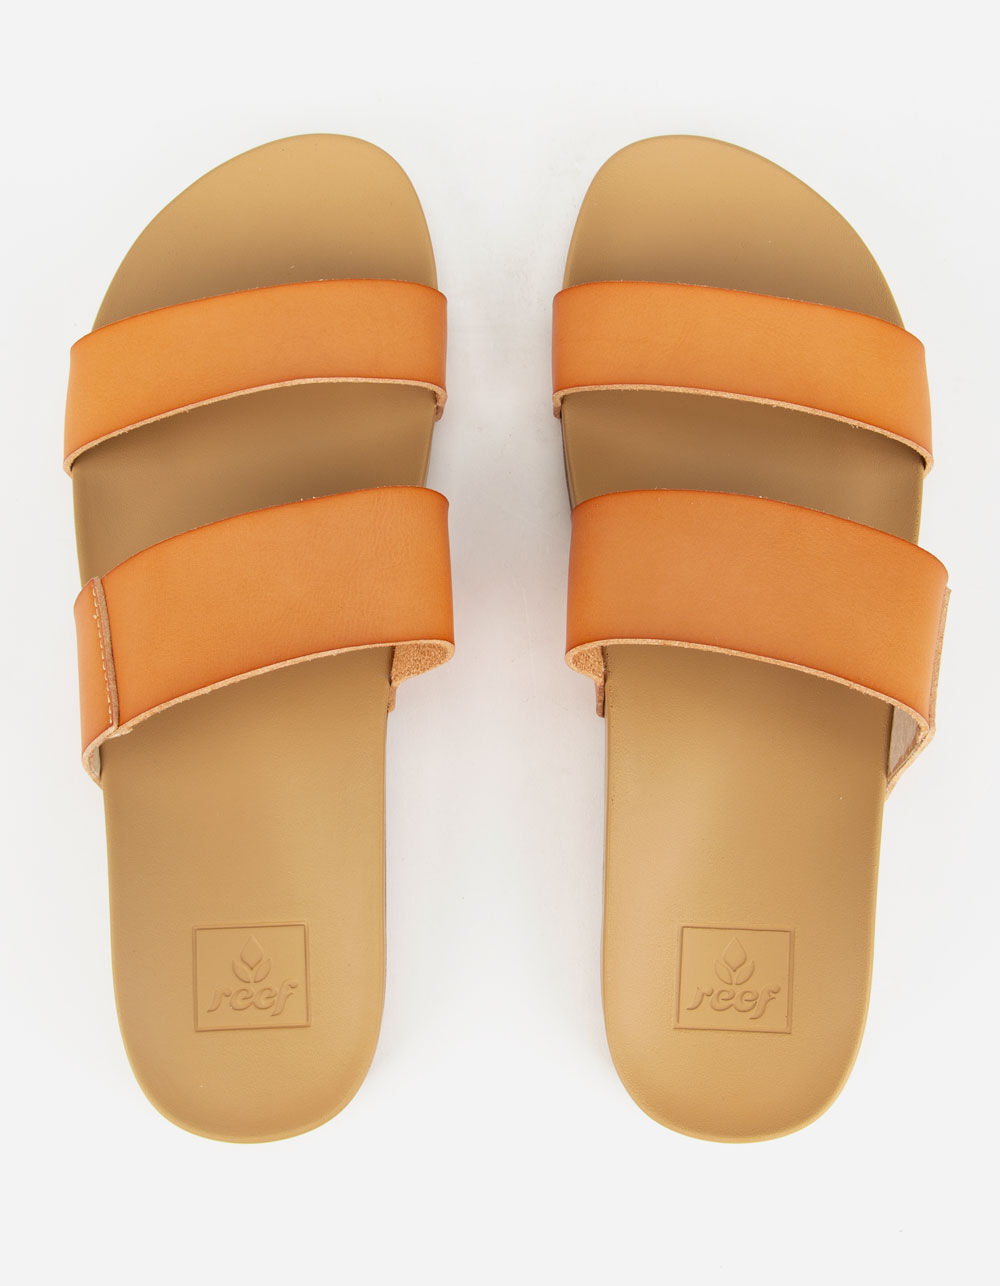 REEF Cushion Bounce Natural Womens Sandals - NATURAL | Tillys